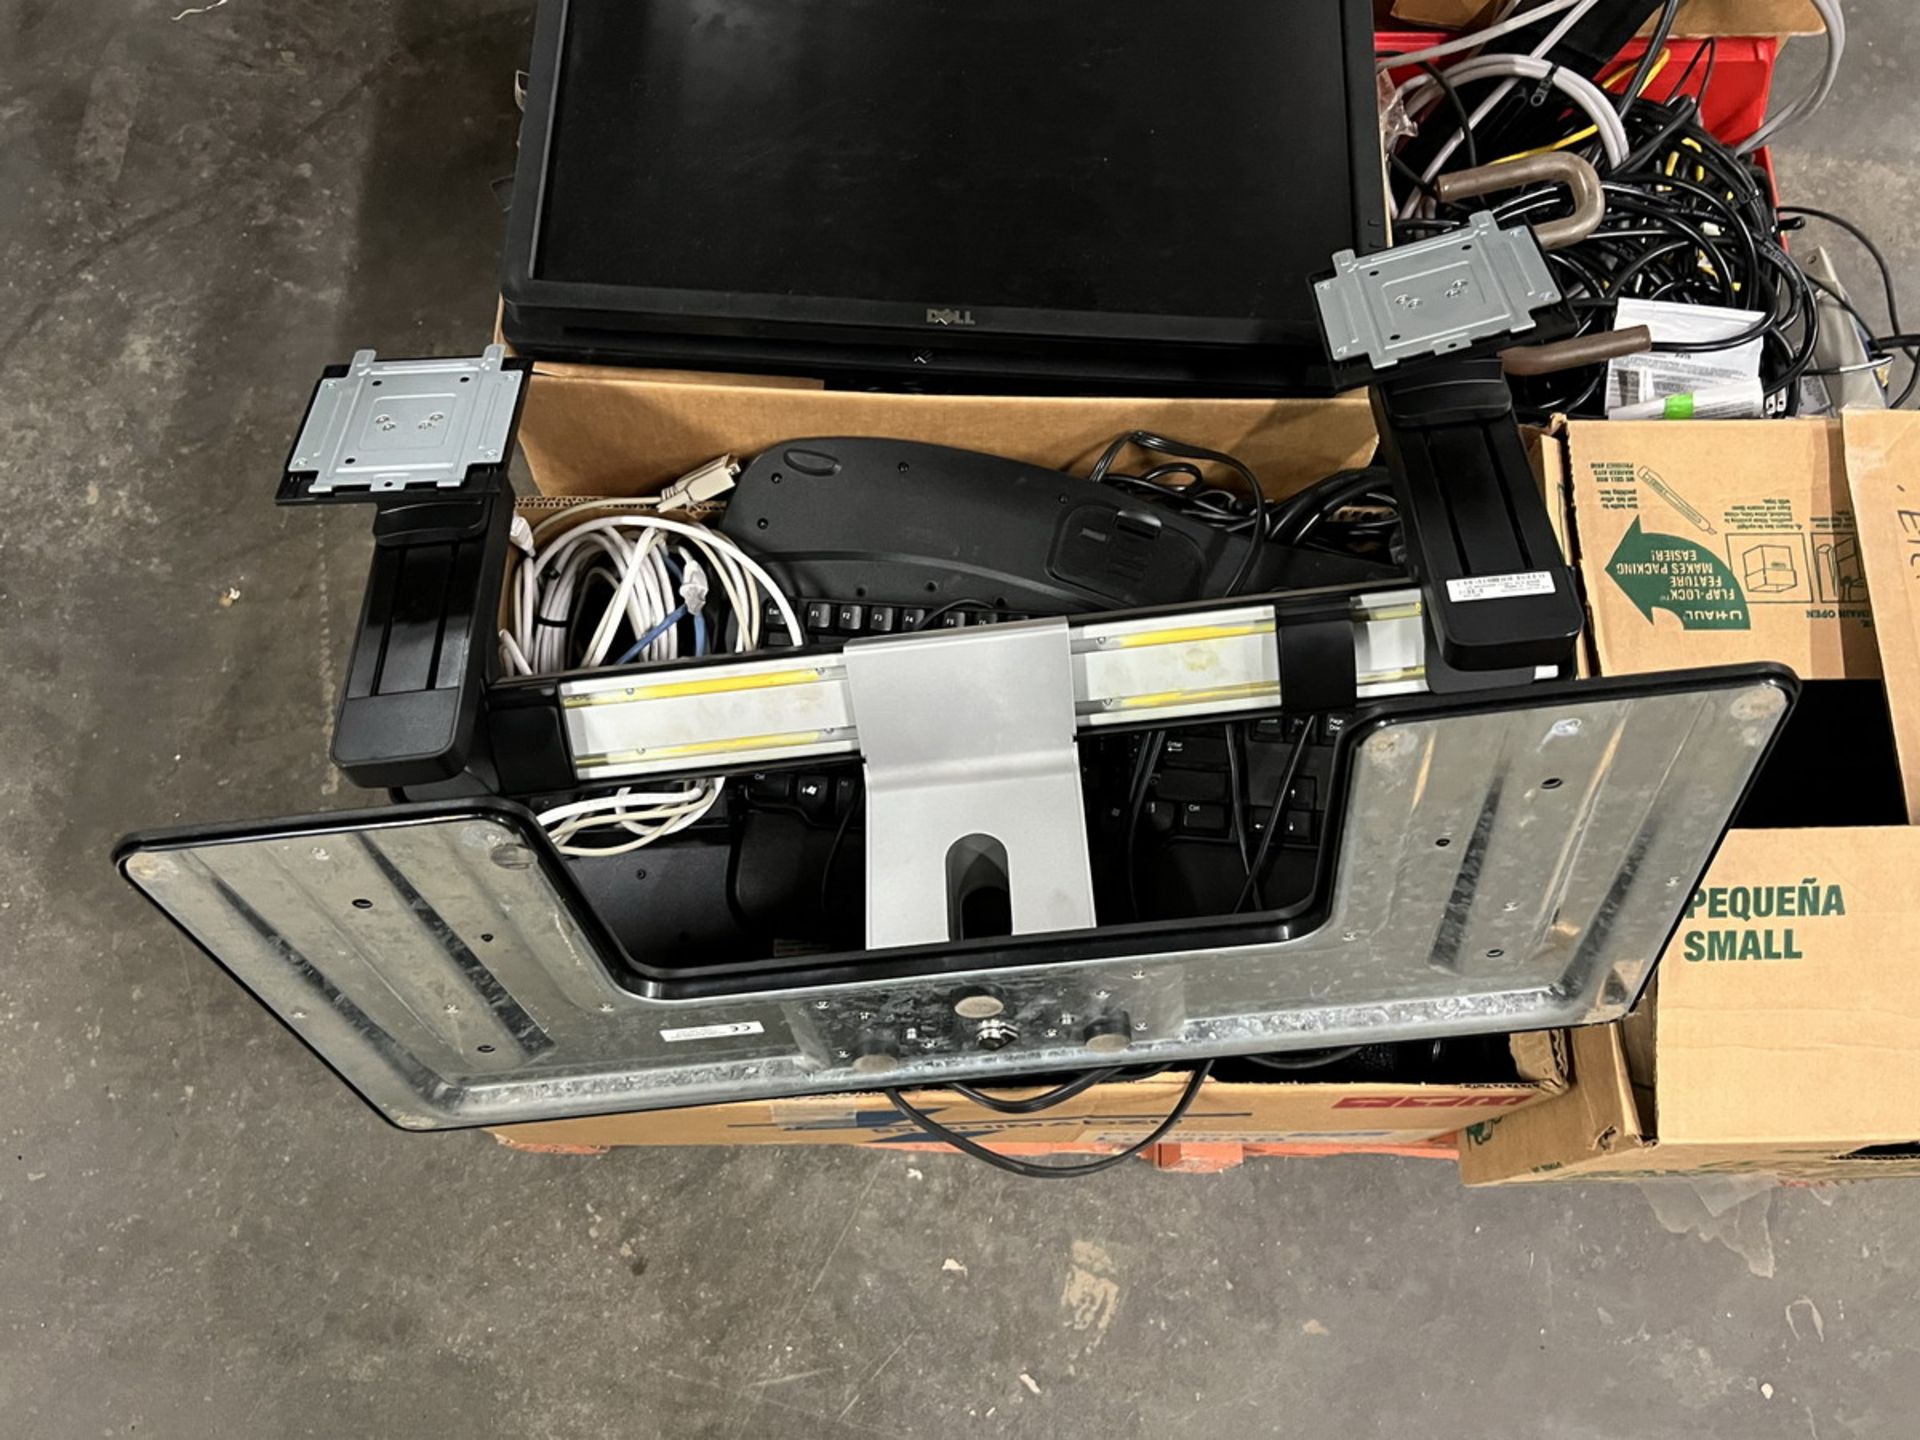 Lot - Assorted Computer Screens, Keyboards, Mice, Servers and Wires (on Skid) - Image 6 of 7